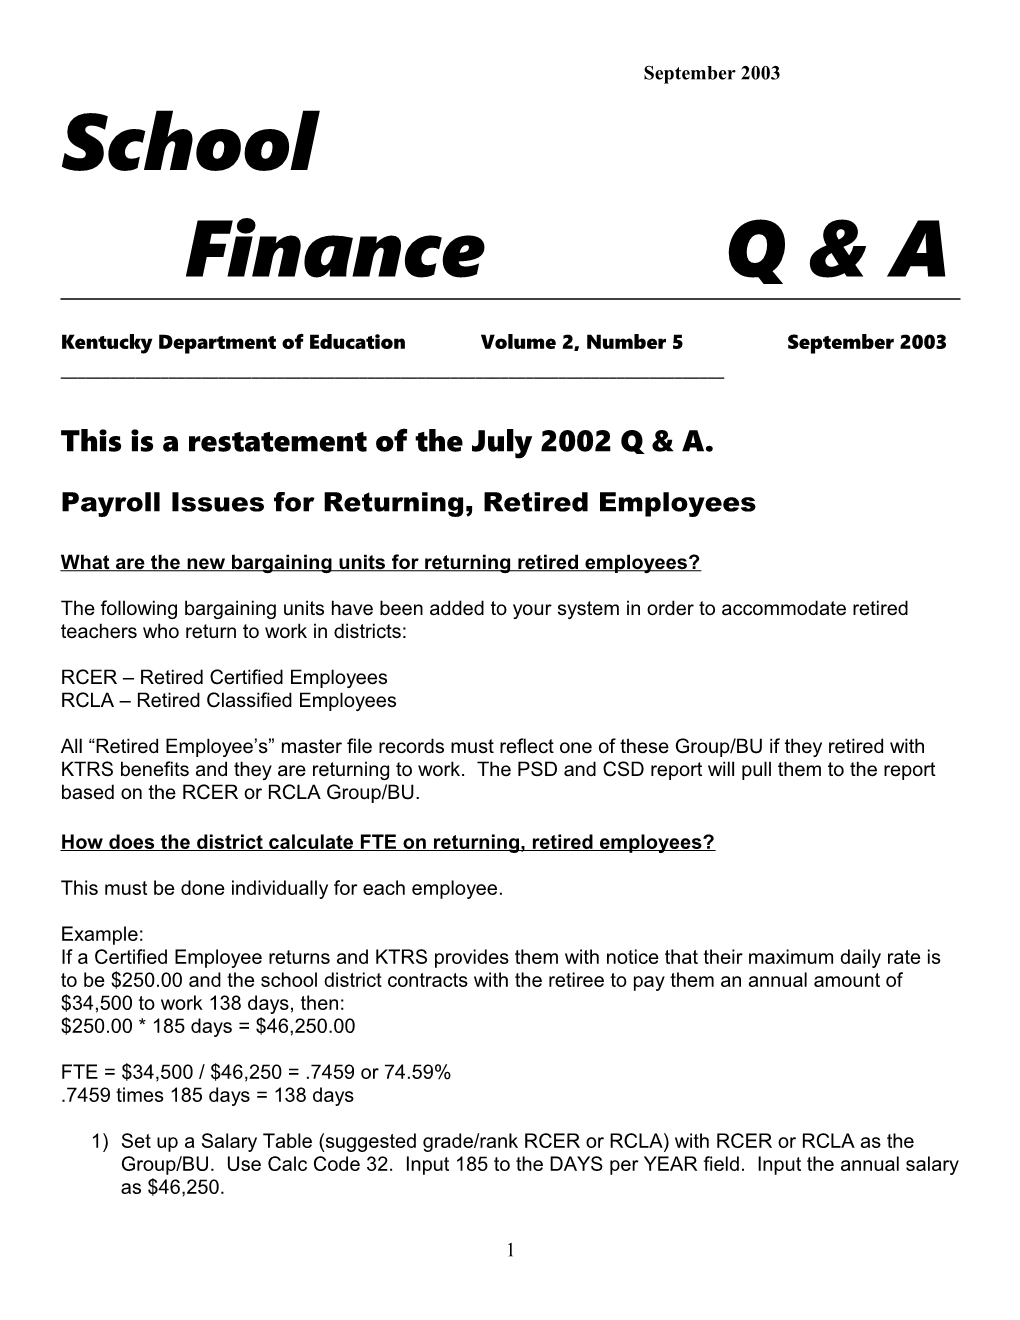 Payroll Issues for Returning, Retired Employees